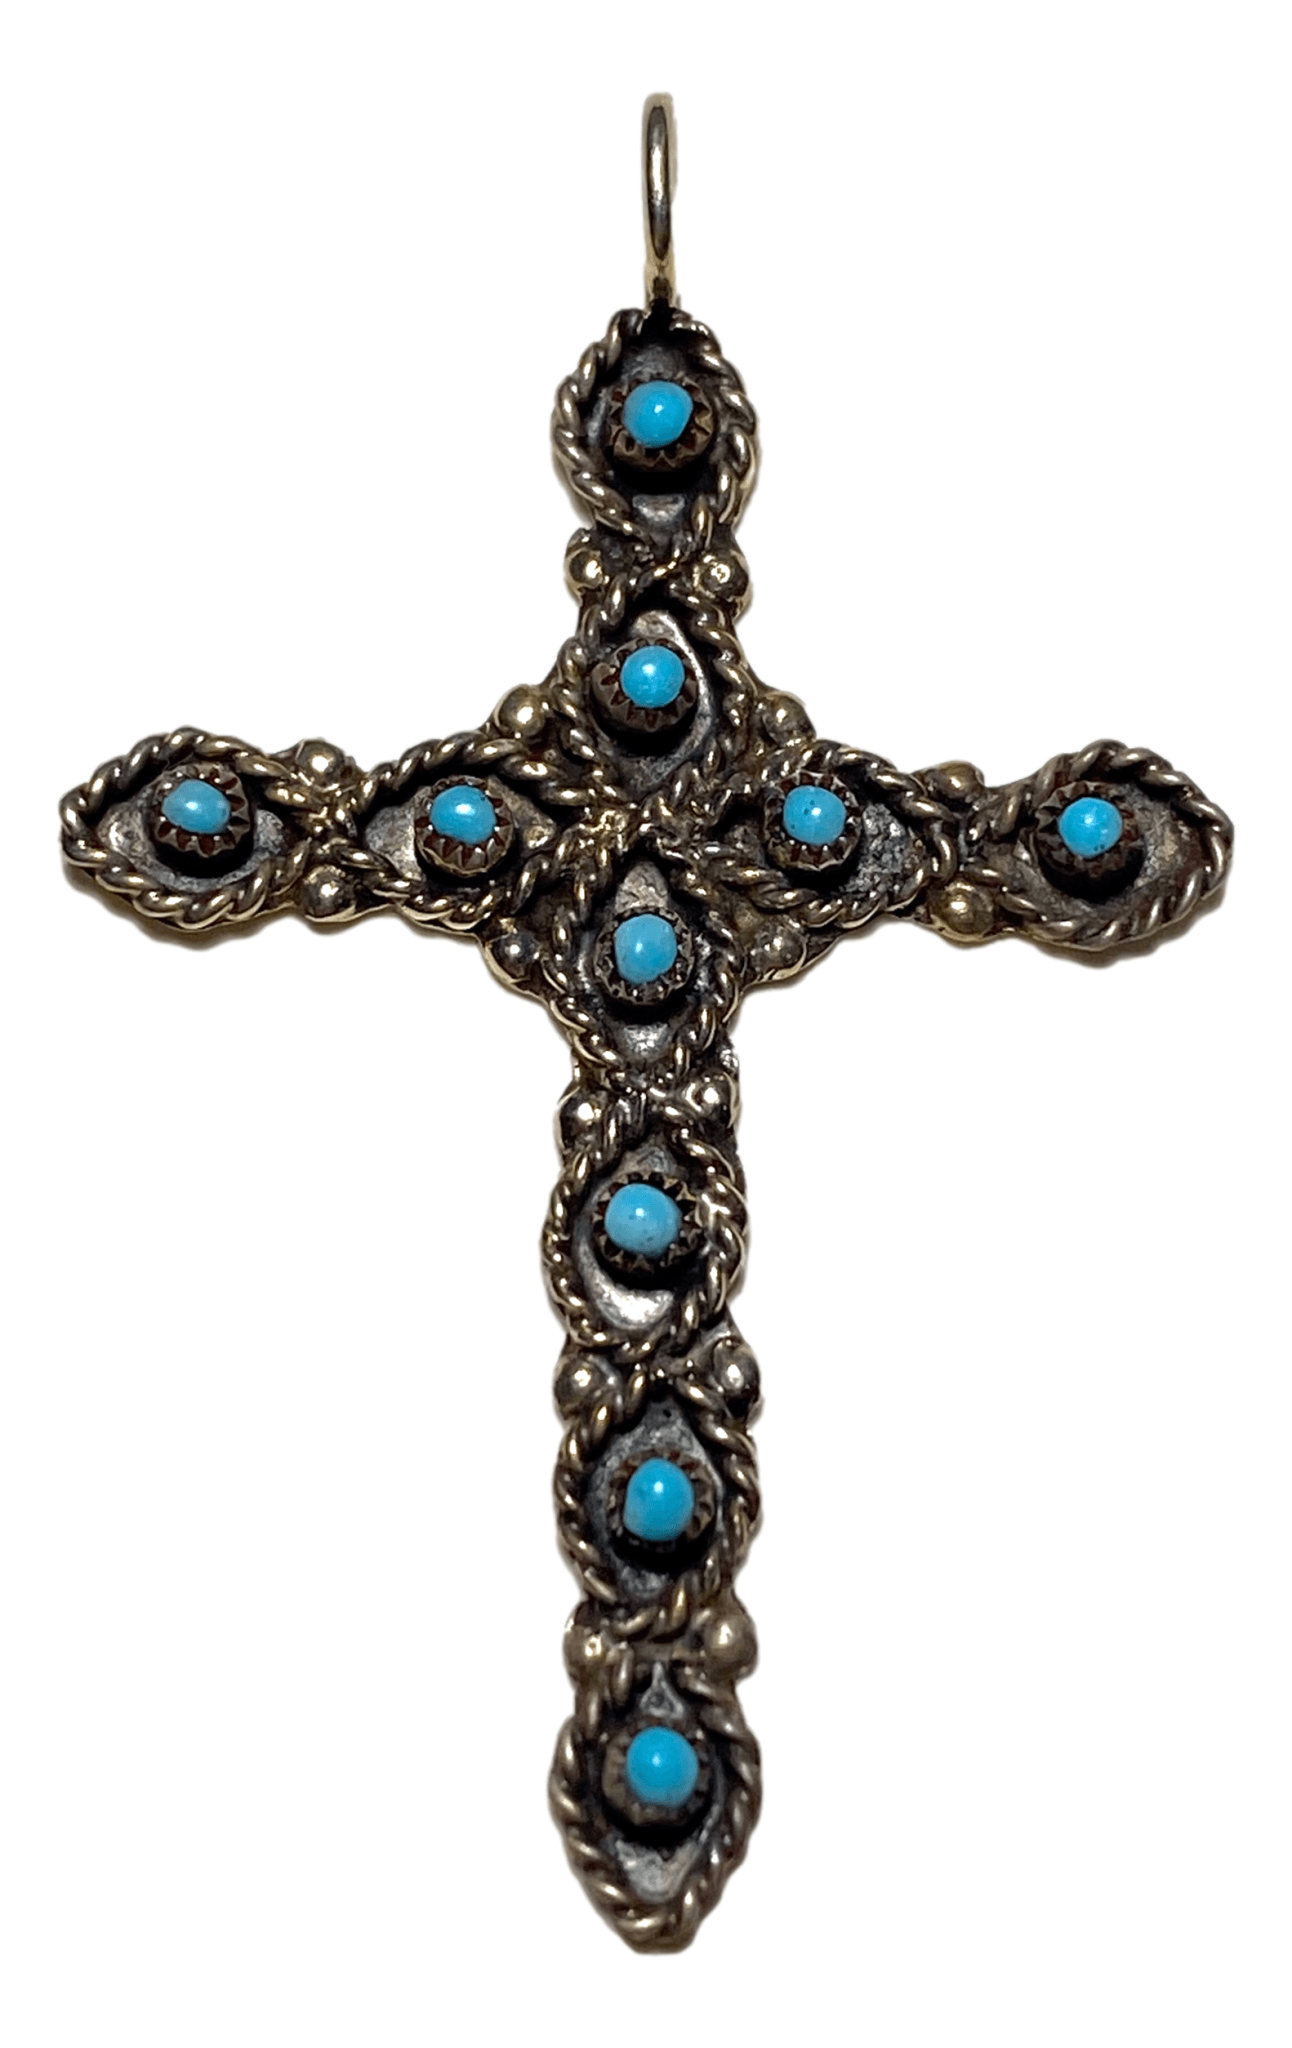 Pendant Cross Sterling Silver Turquoise 10 Count Entwined Chain Handcrafted by New Mexico Artisan 1 1/4 L x 1 1/4 W inches - Ysleta Mission Gift Shop- VOTED El Paso's Best Gift Shop